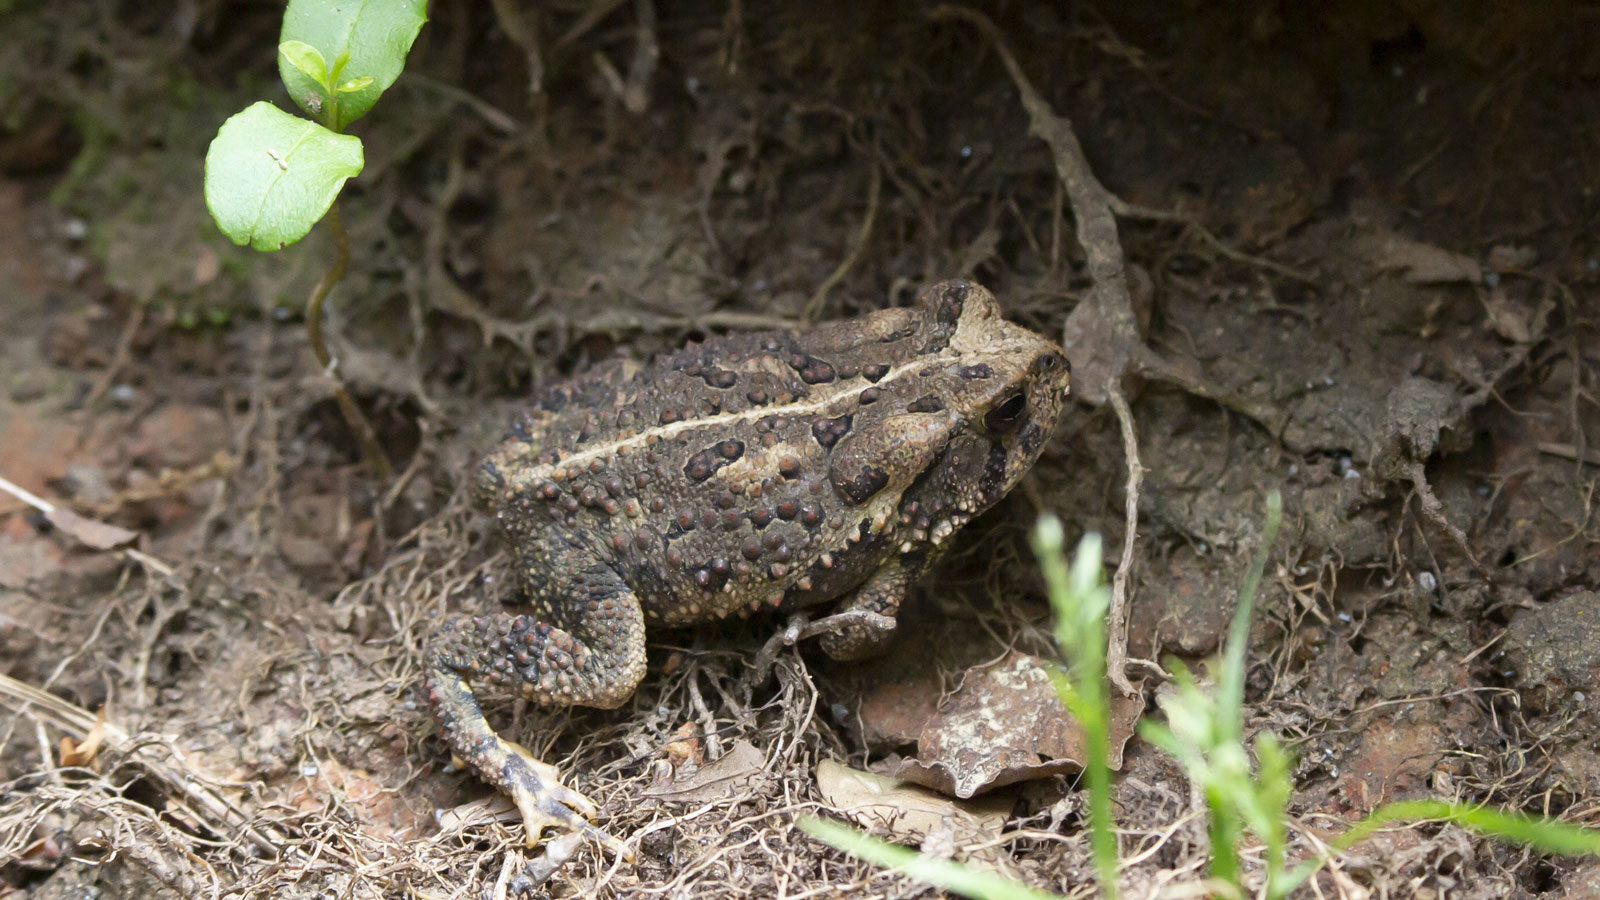 North Louisiana Amphibians: American toad in drying mud